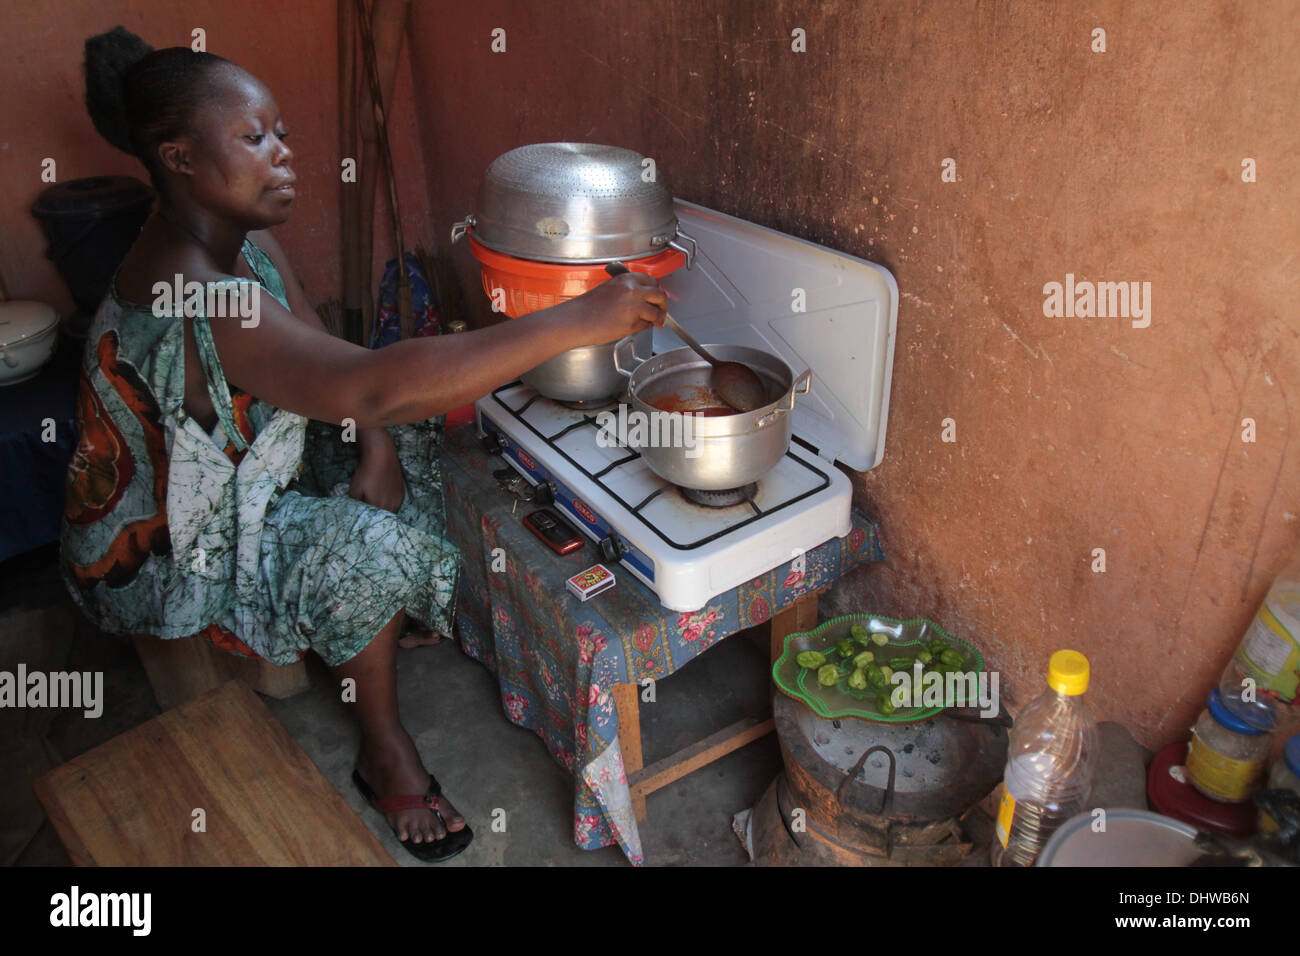 African woman cooking dinner. Stock Photo